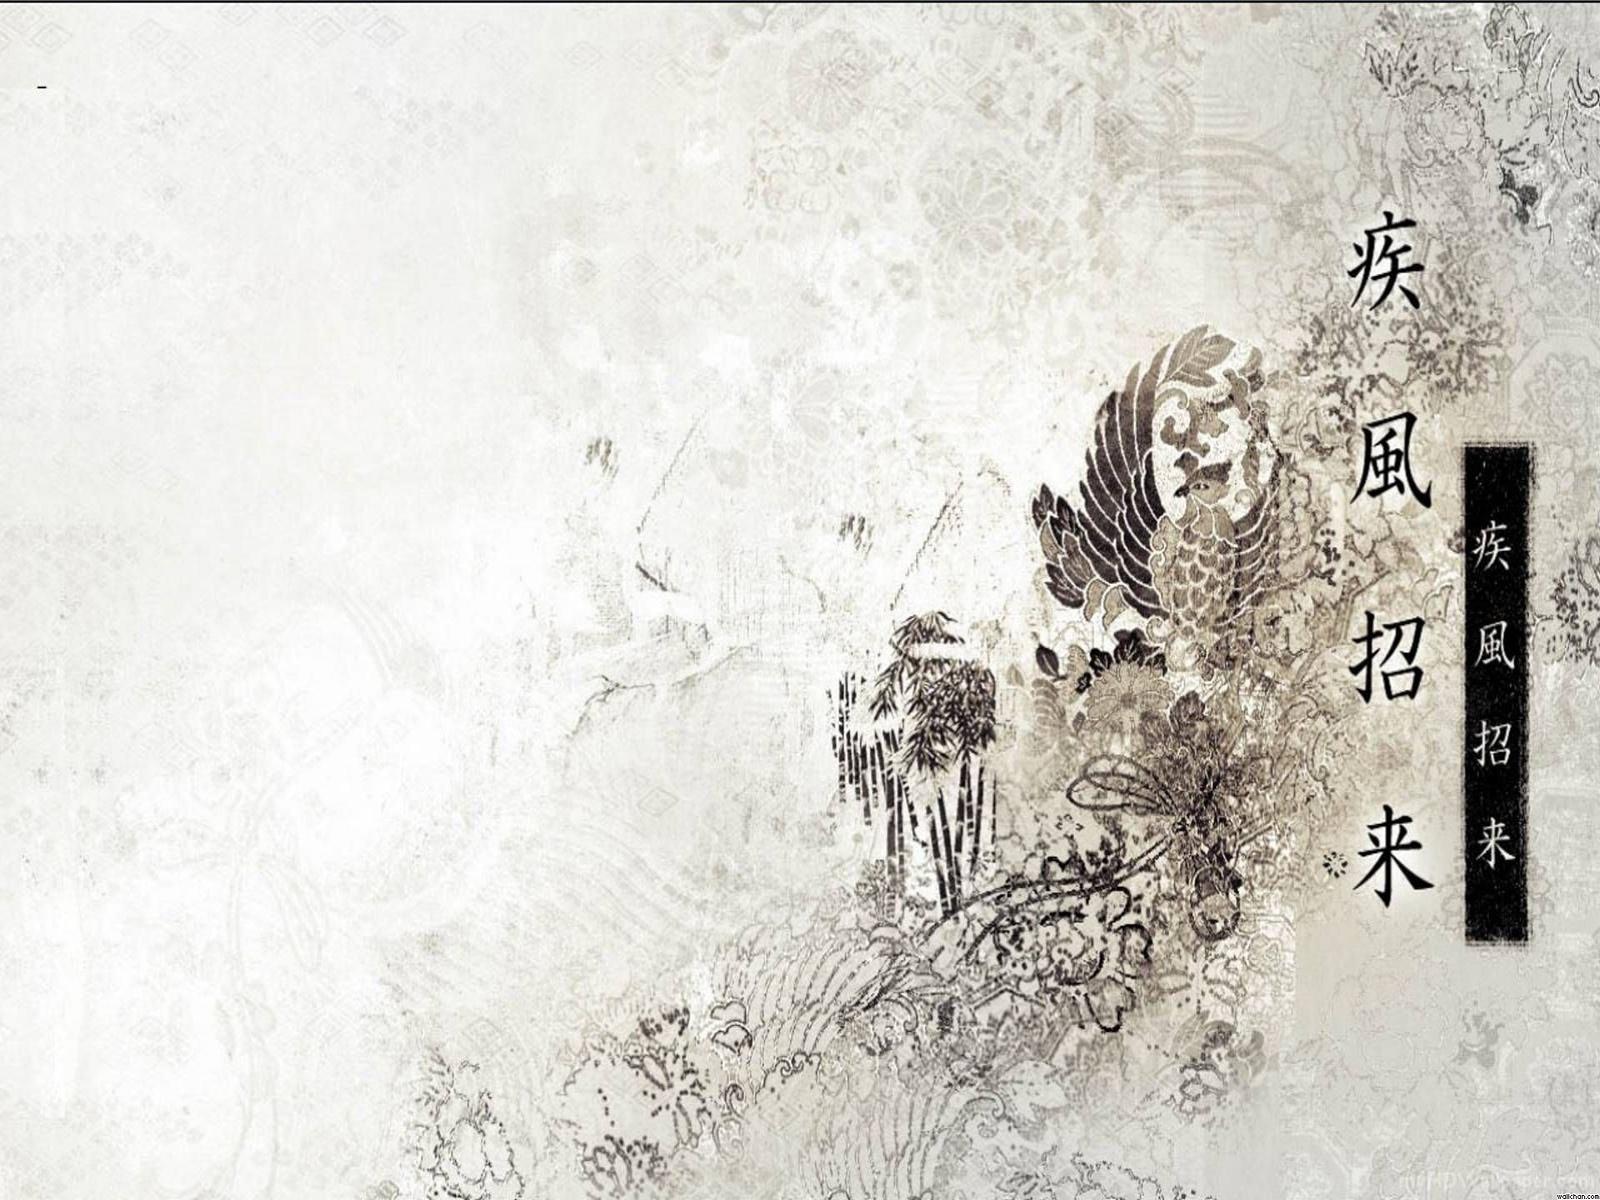 Asian art08 - (#141246) - High Quality and Resolution Wallpapers ...